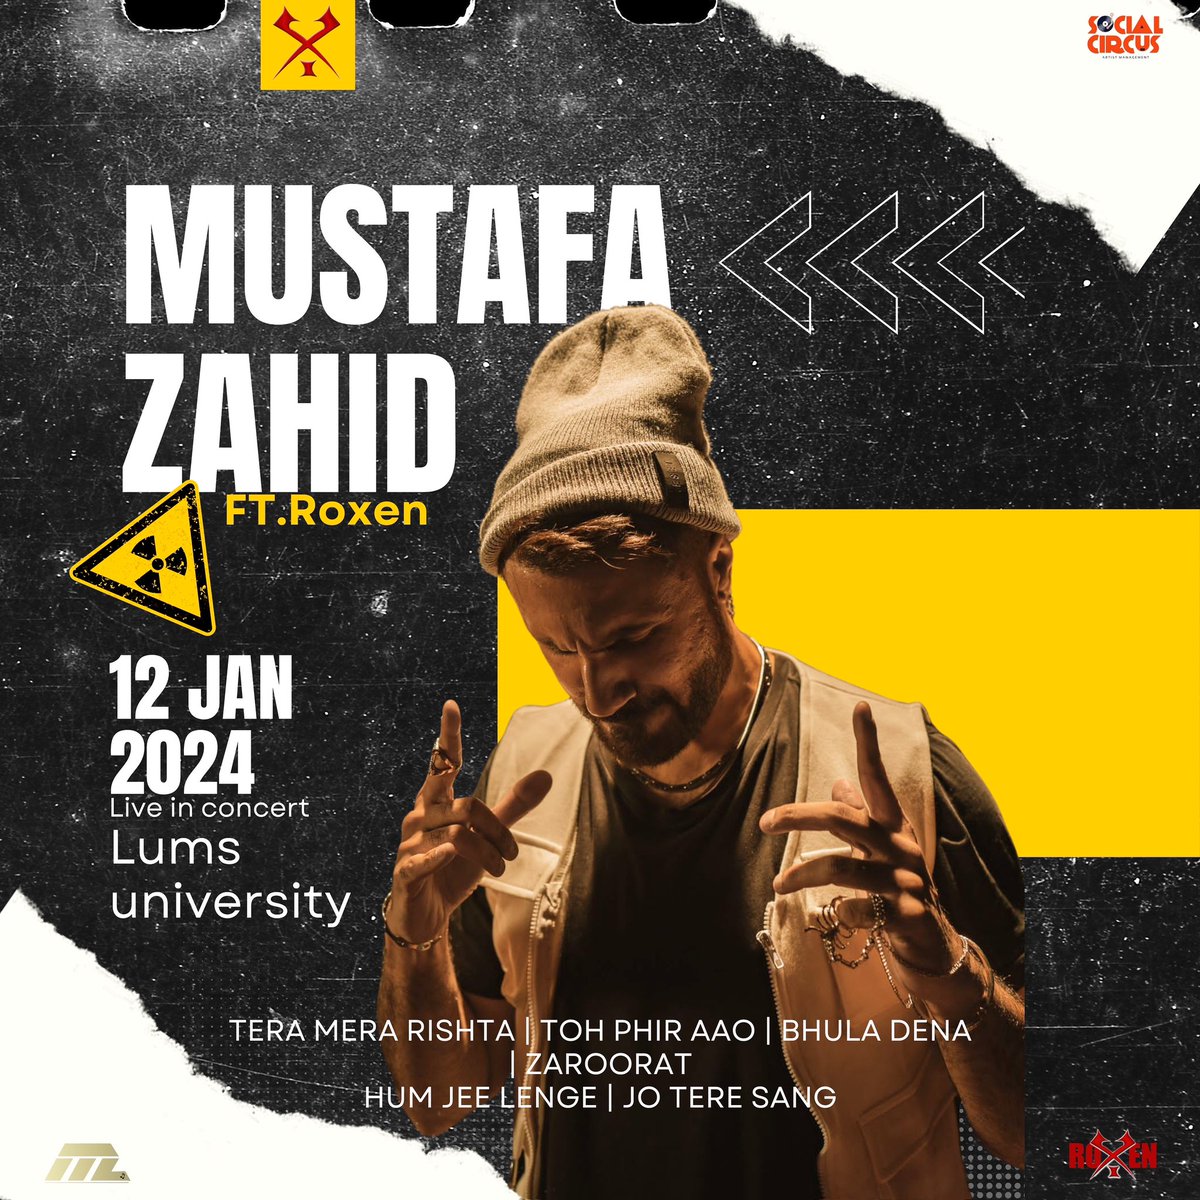 Should be good fun tomorrow at LUMS with @rocknroxen. #mustafazahid #roxen #giglife